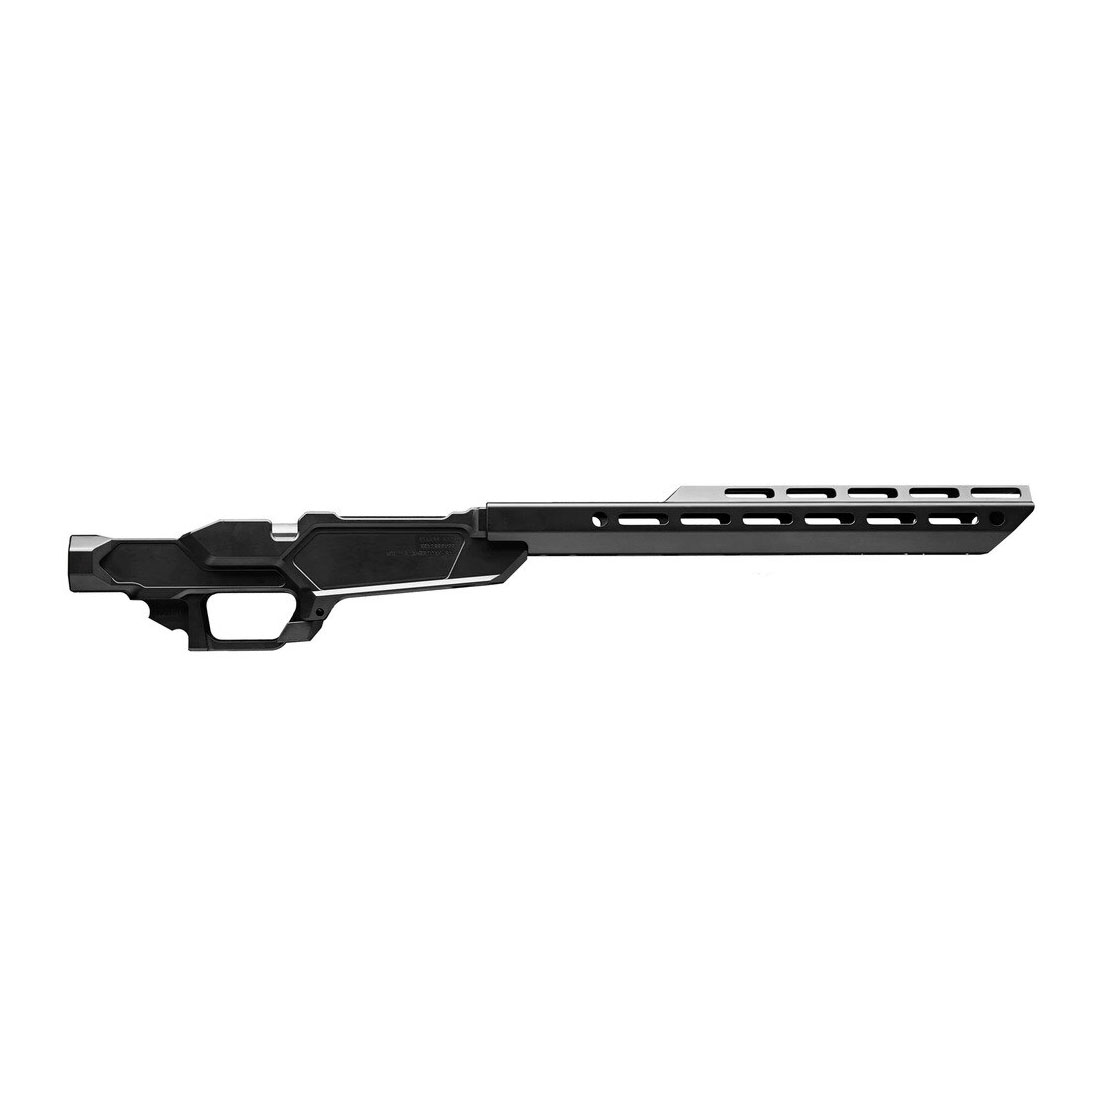 Will the AR-mag compatible version listed on the sharpsbros website be available on Anarchy Outdoors soon?